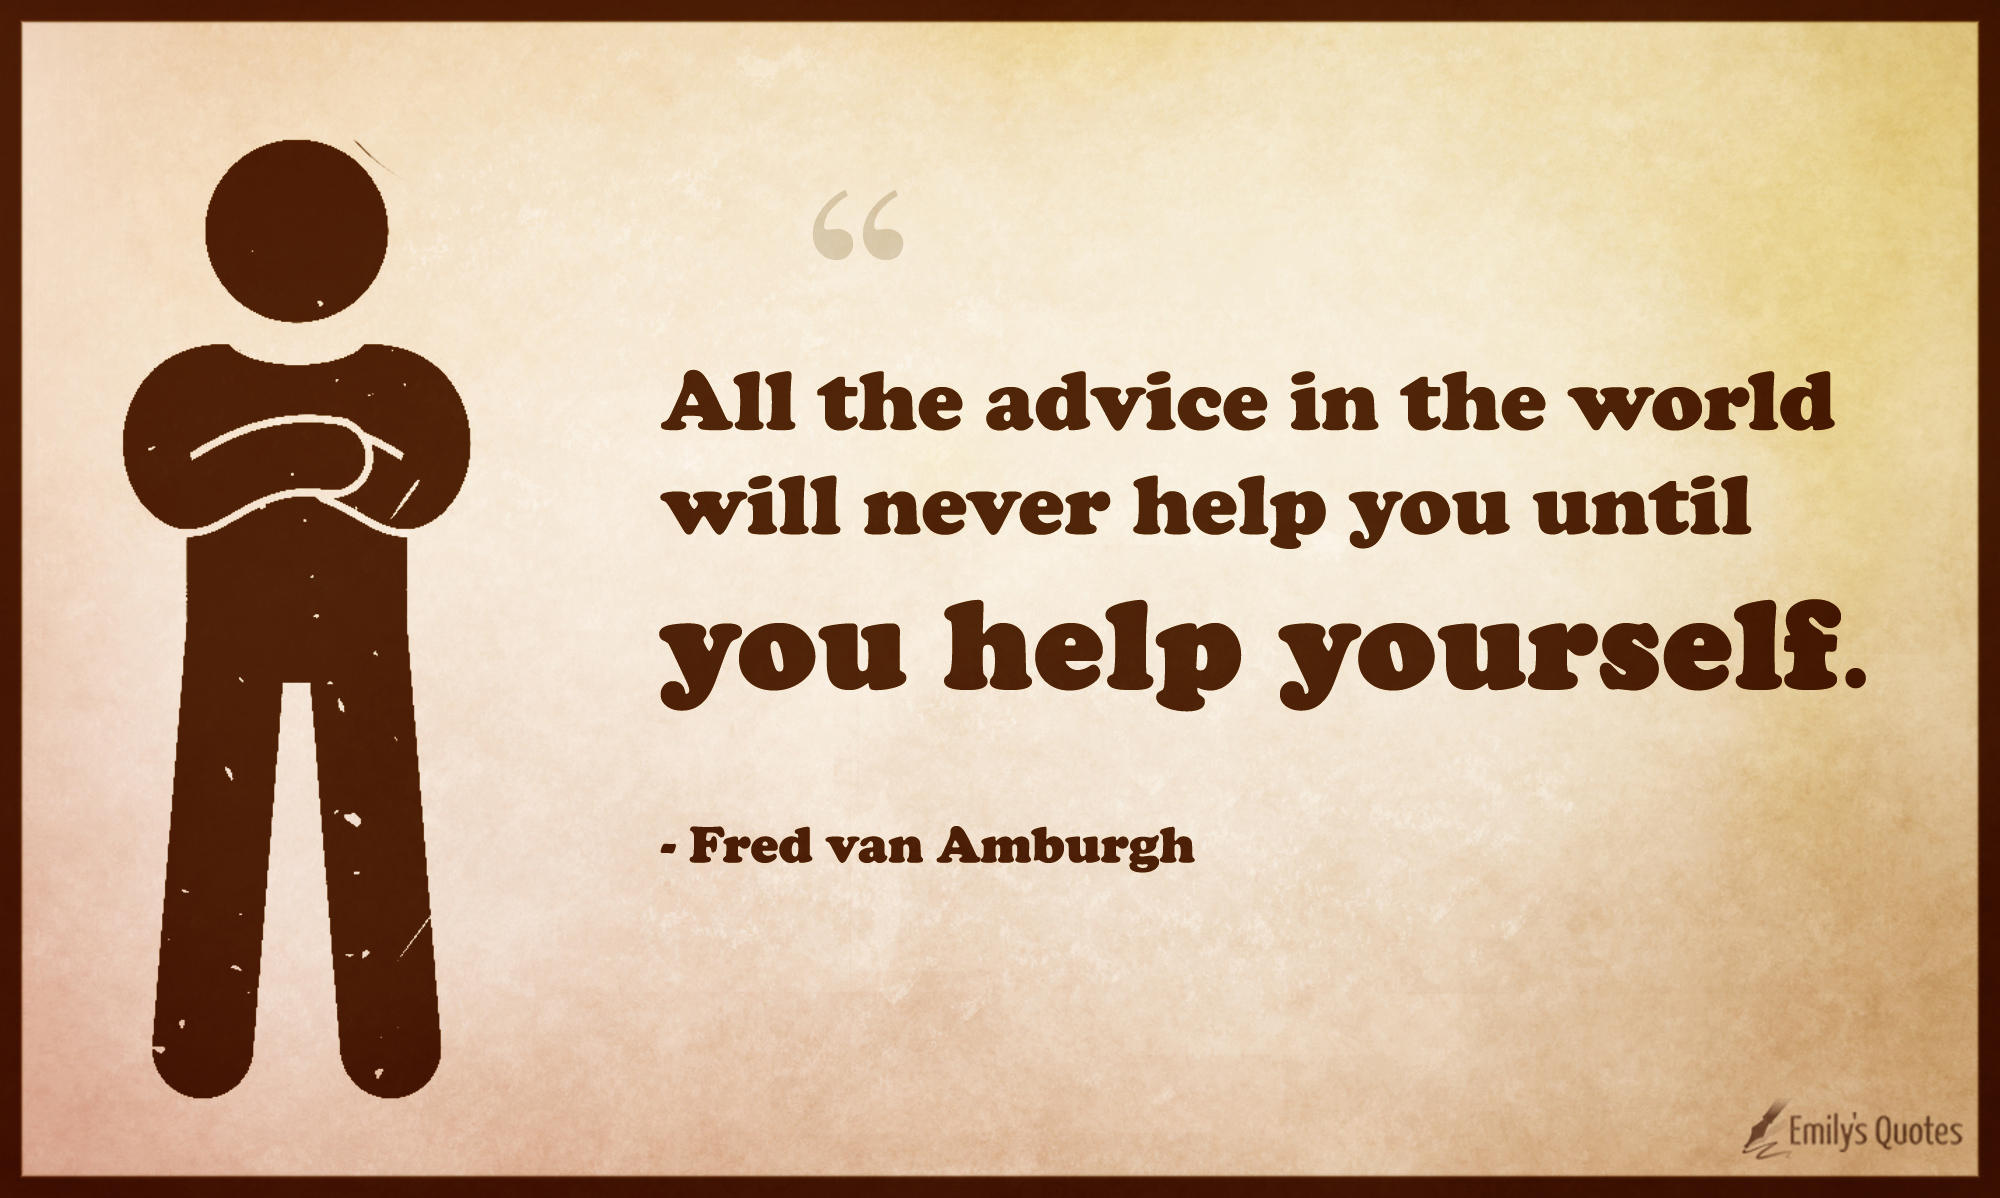 All the advice in the world will never help you until you help yourself